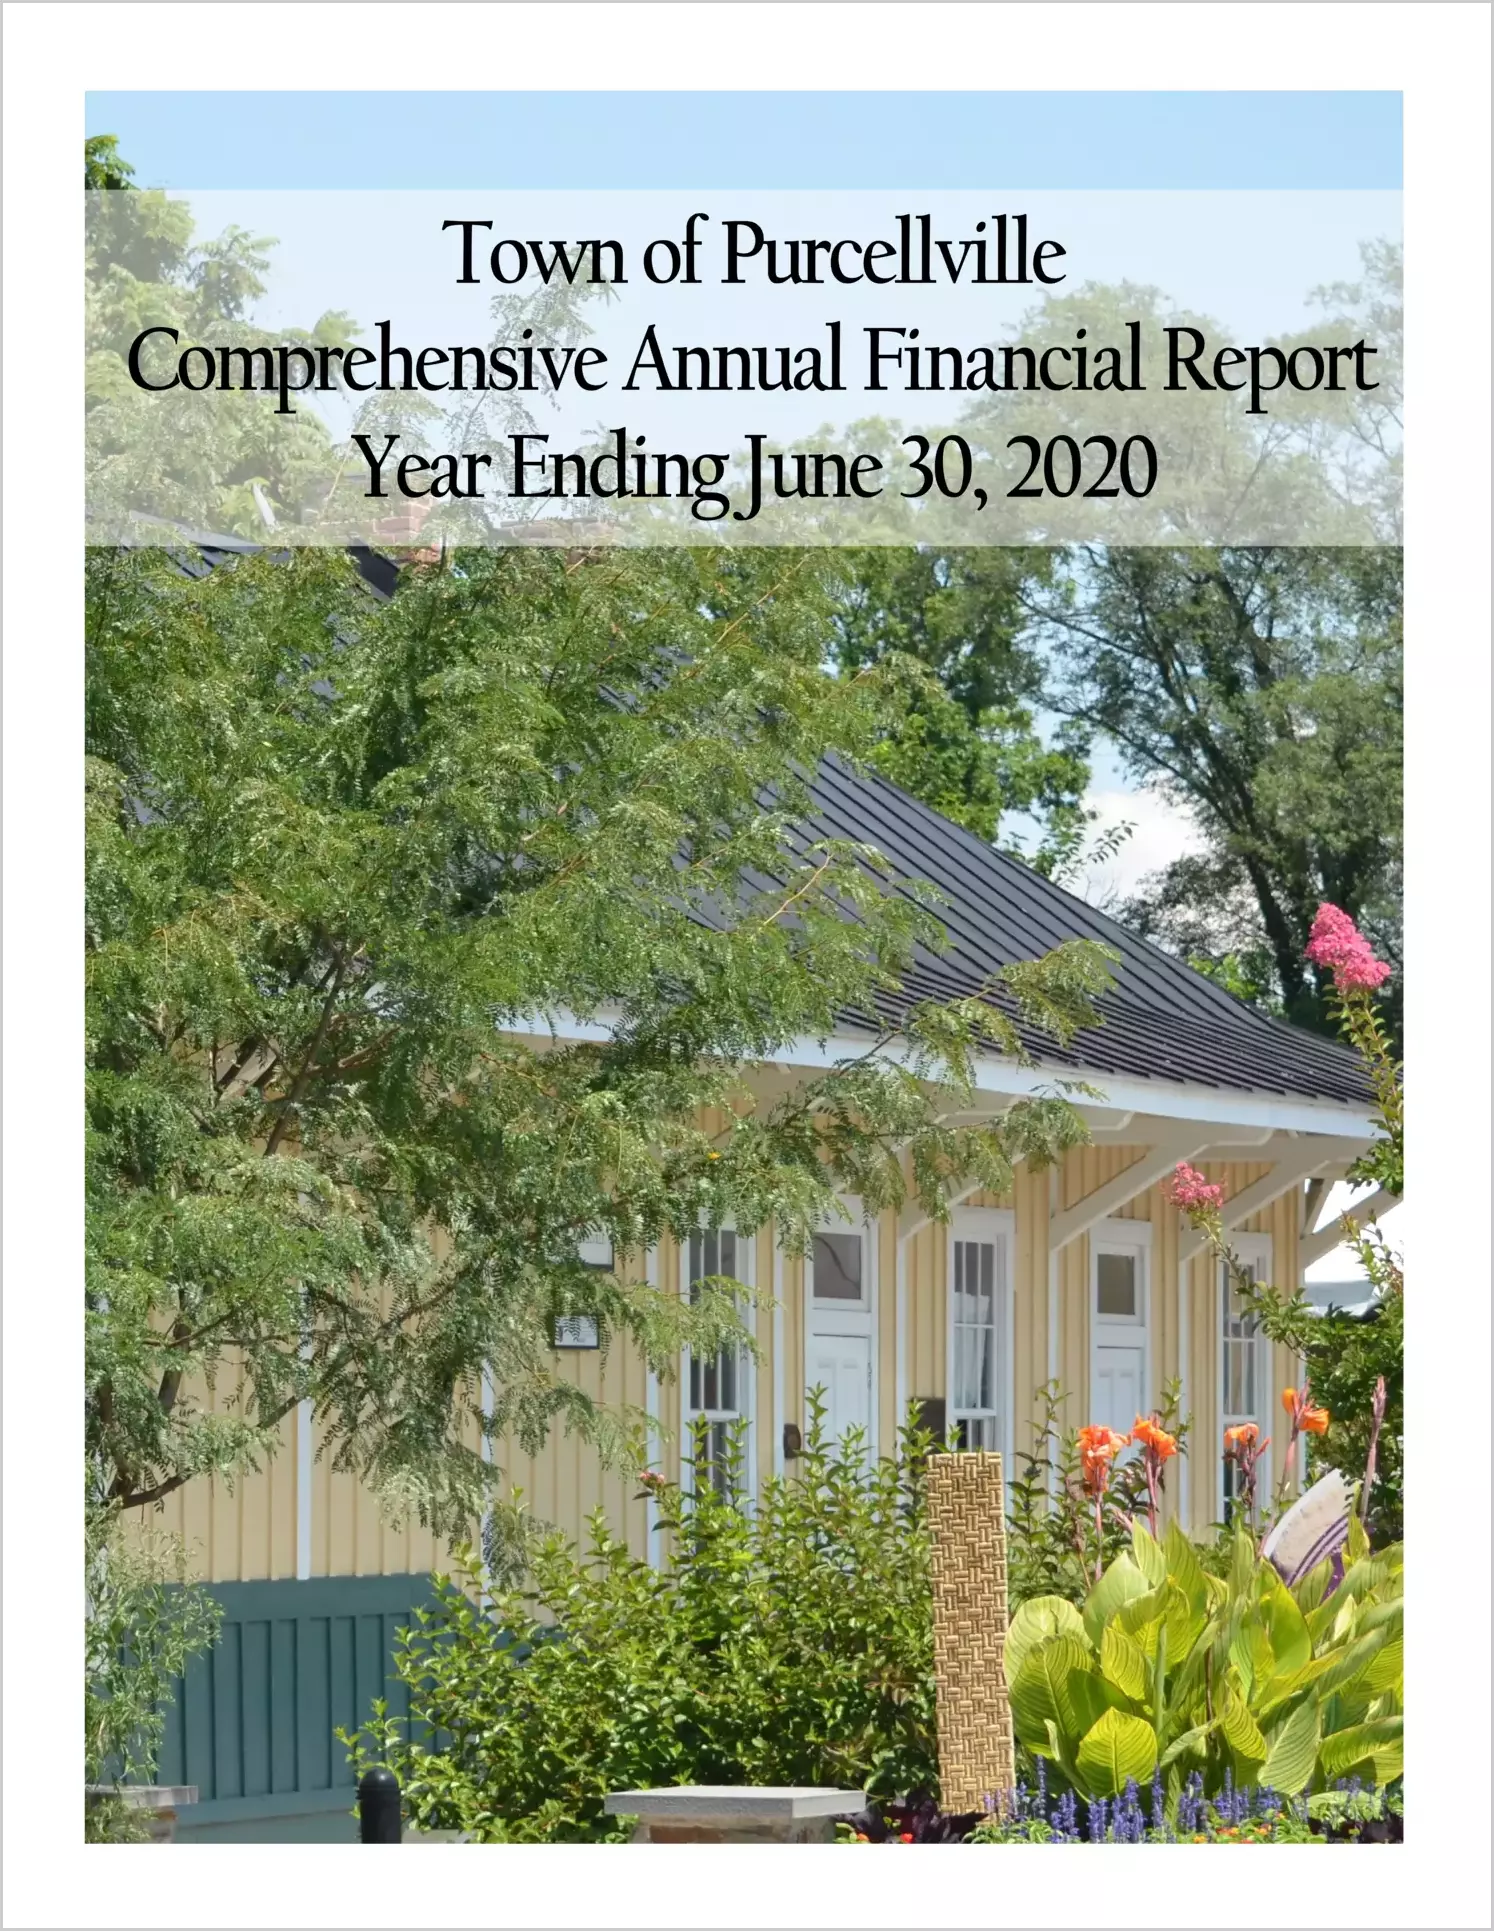 2020 Annual Financial Report for Town of Purcellville